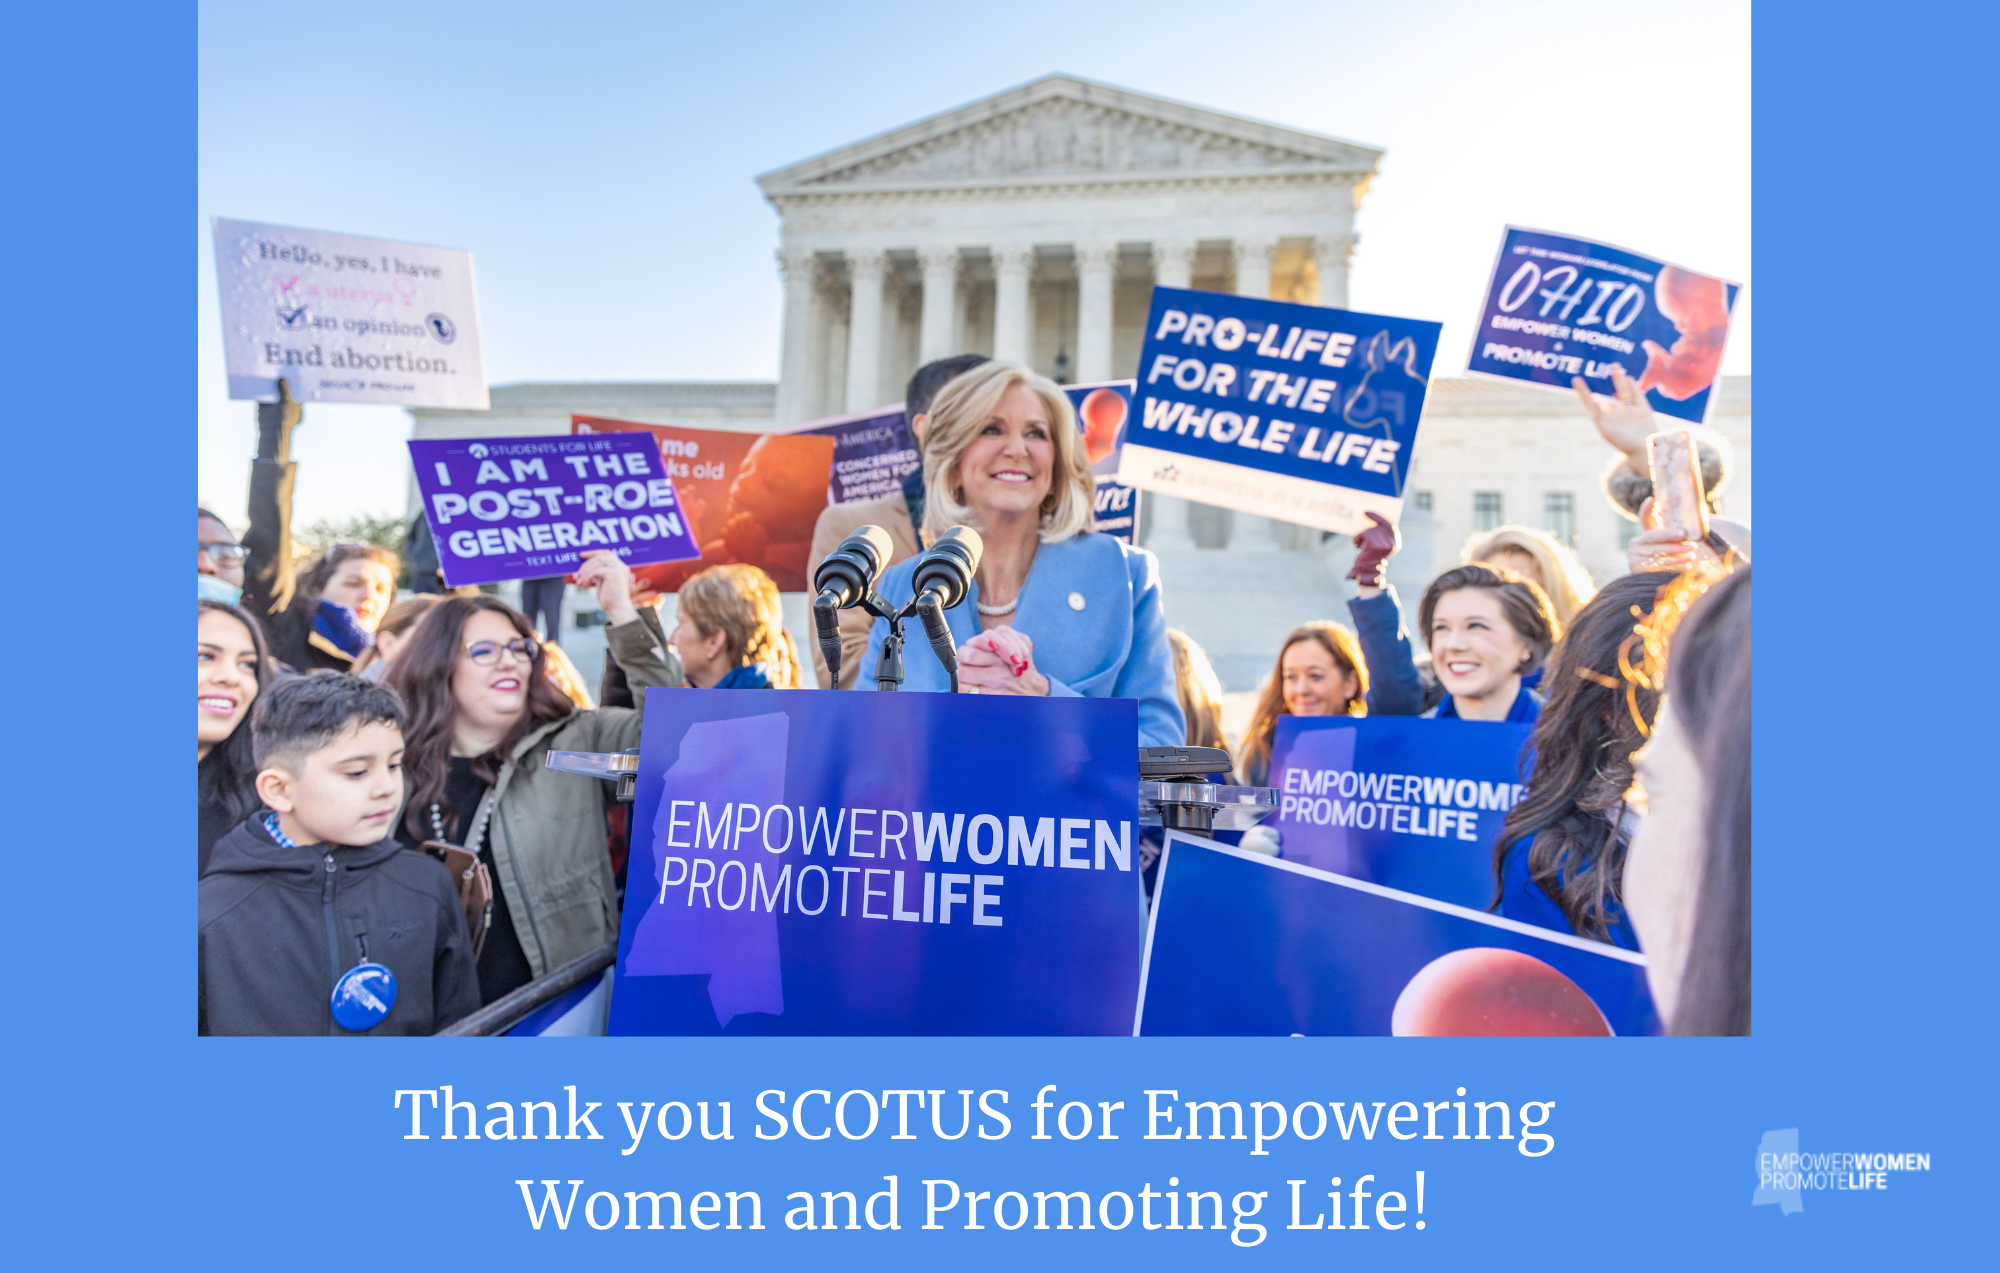 Thank You SCOTUS for Empowering Women and Promoting Life!